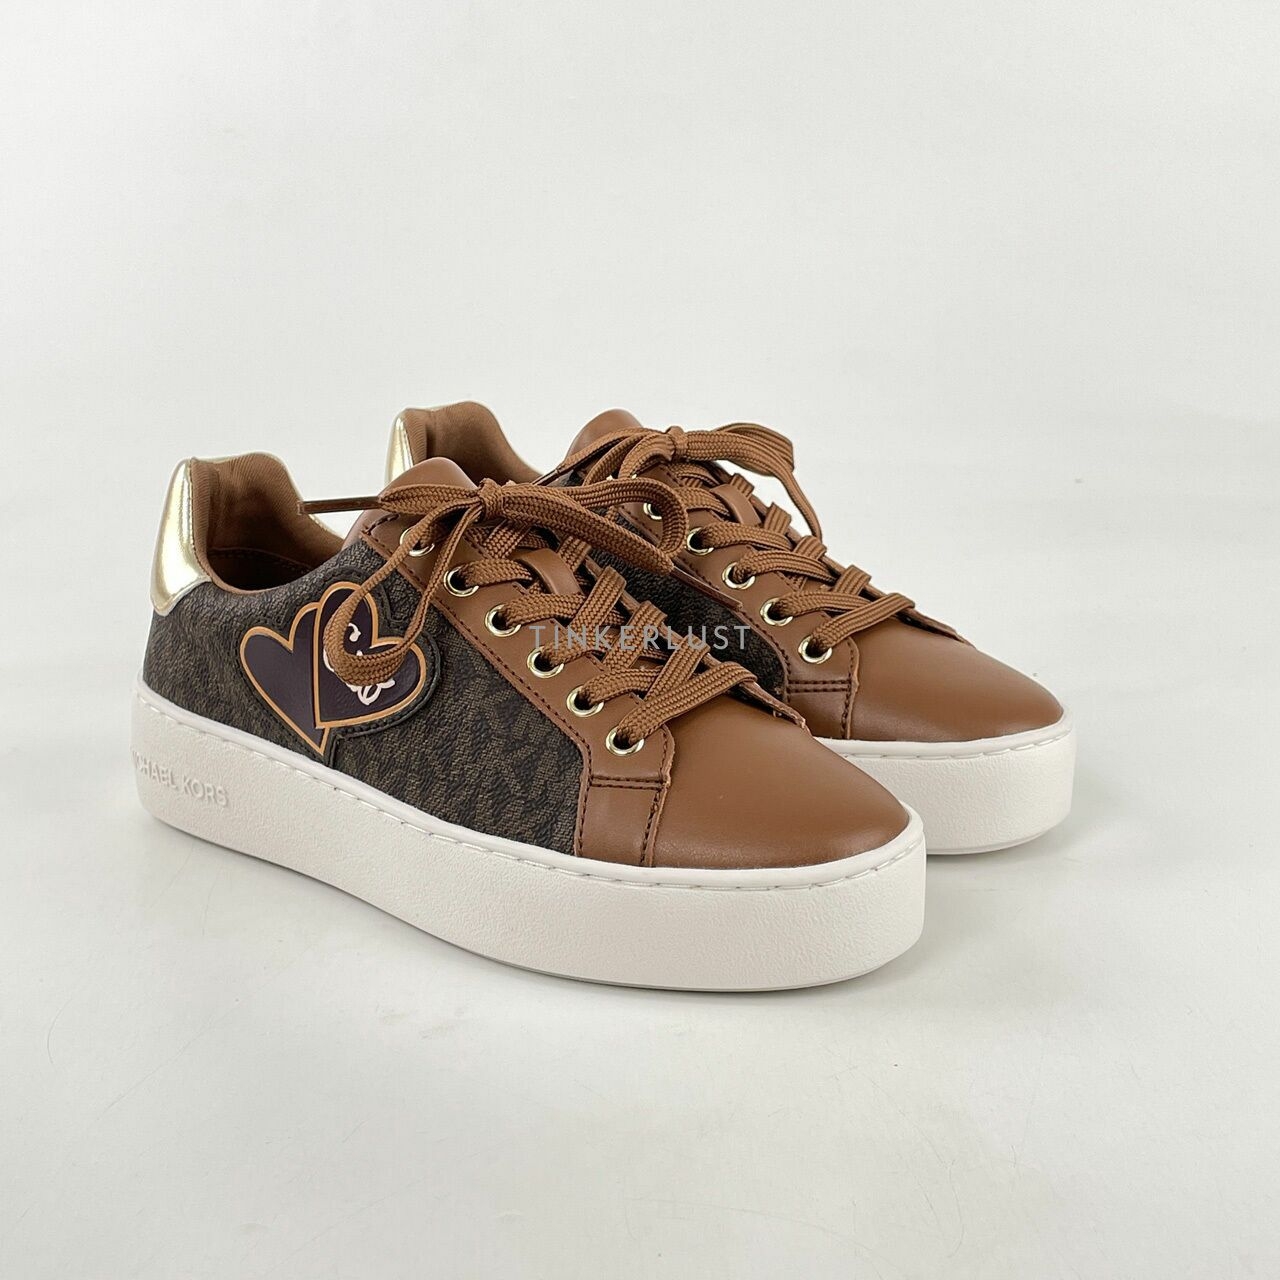 Michael Kors Shoes Poppy Lace Up Ciao Patch Brown Sneakers